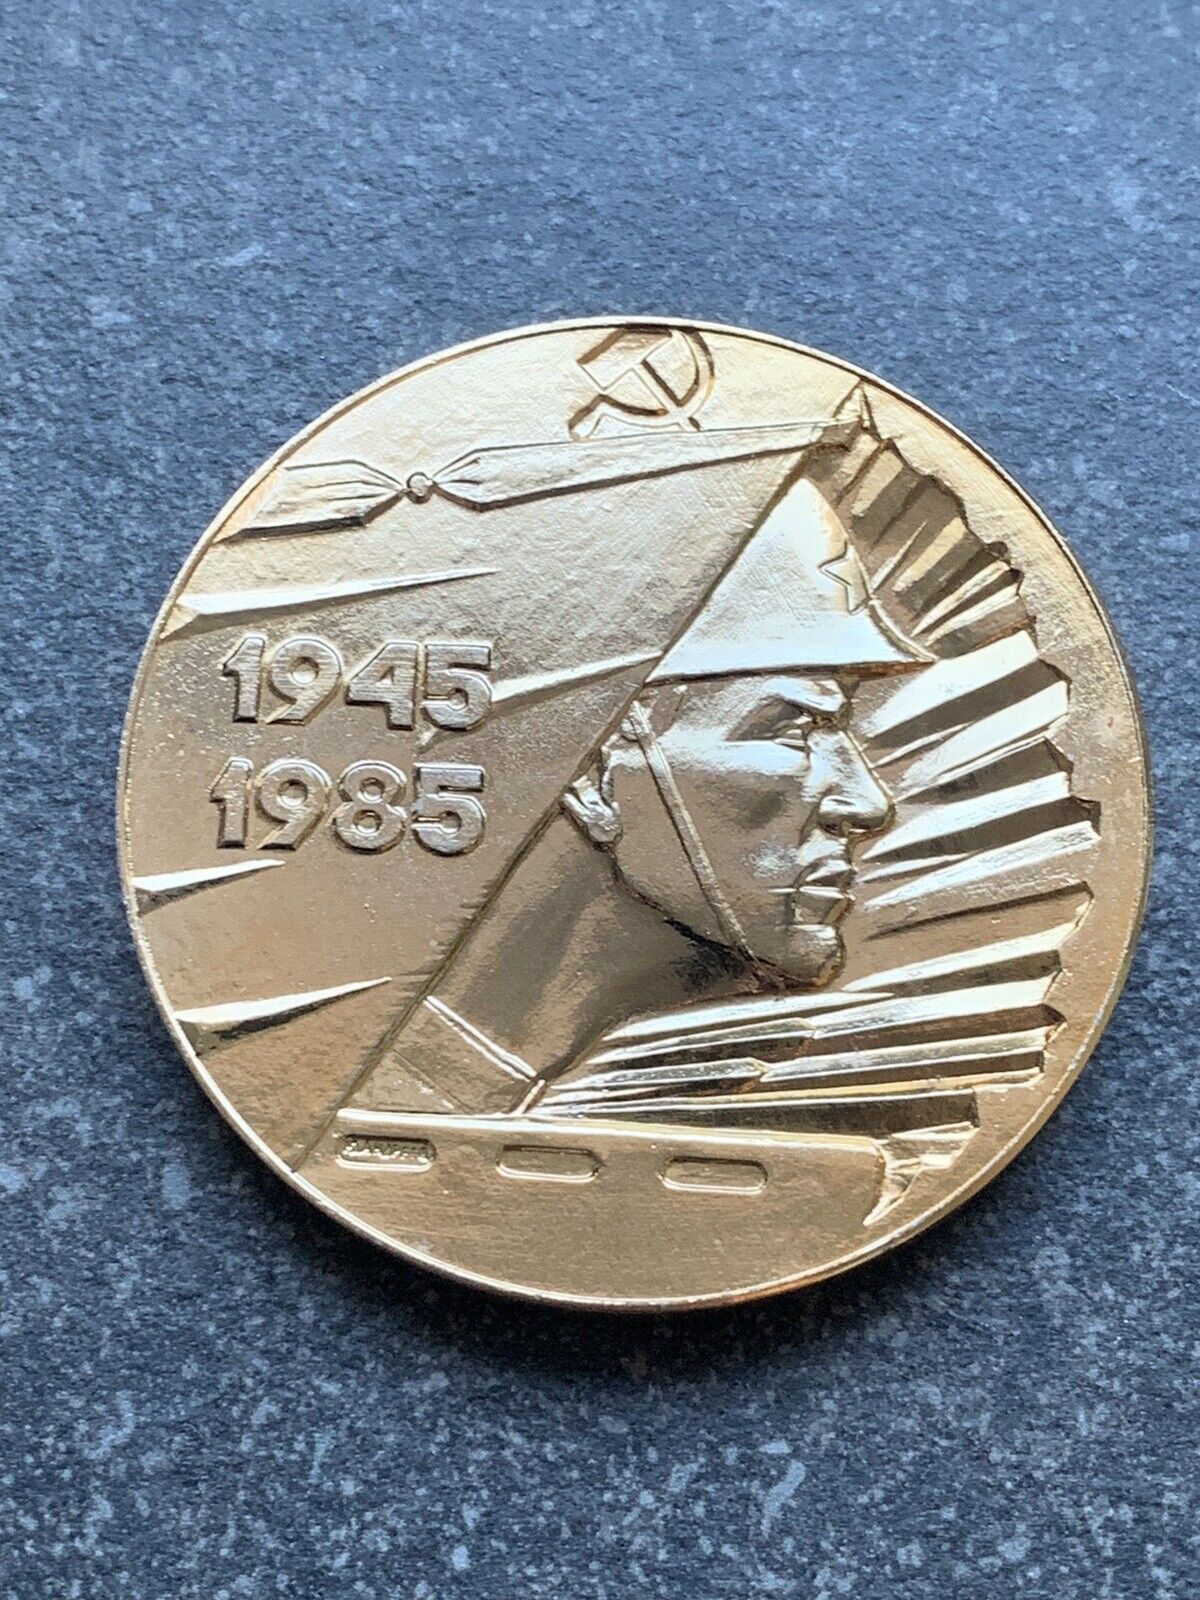 1985 WW2 Victory 40th Anniversary Commemorative Collectible Medal